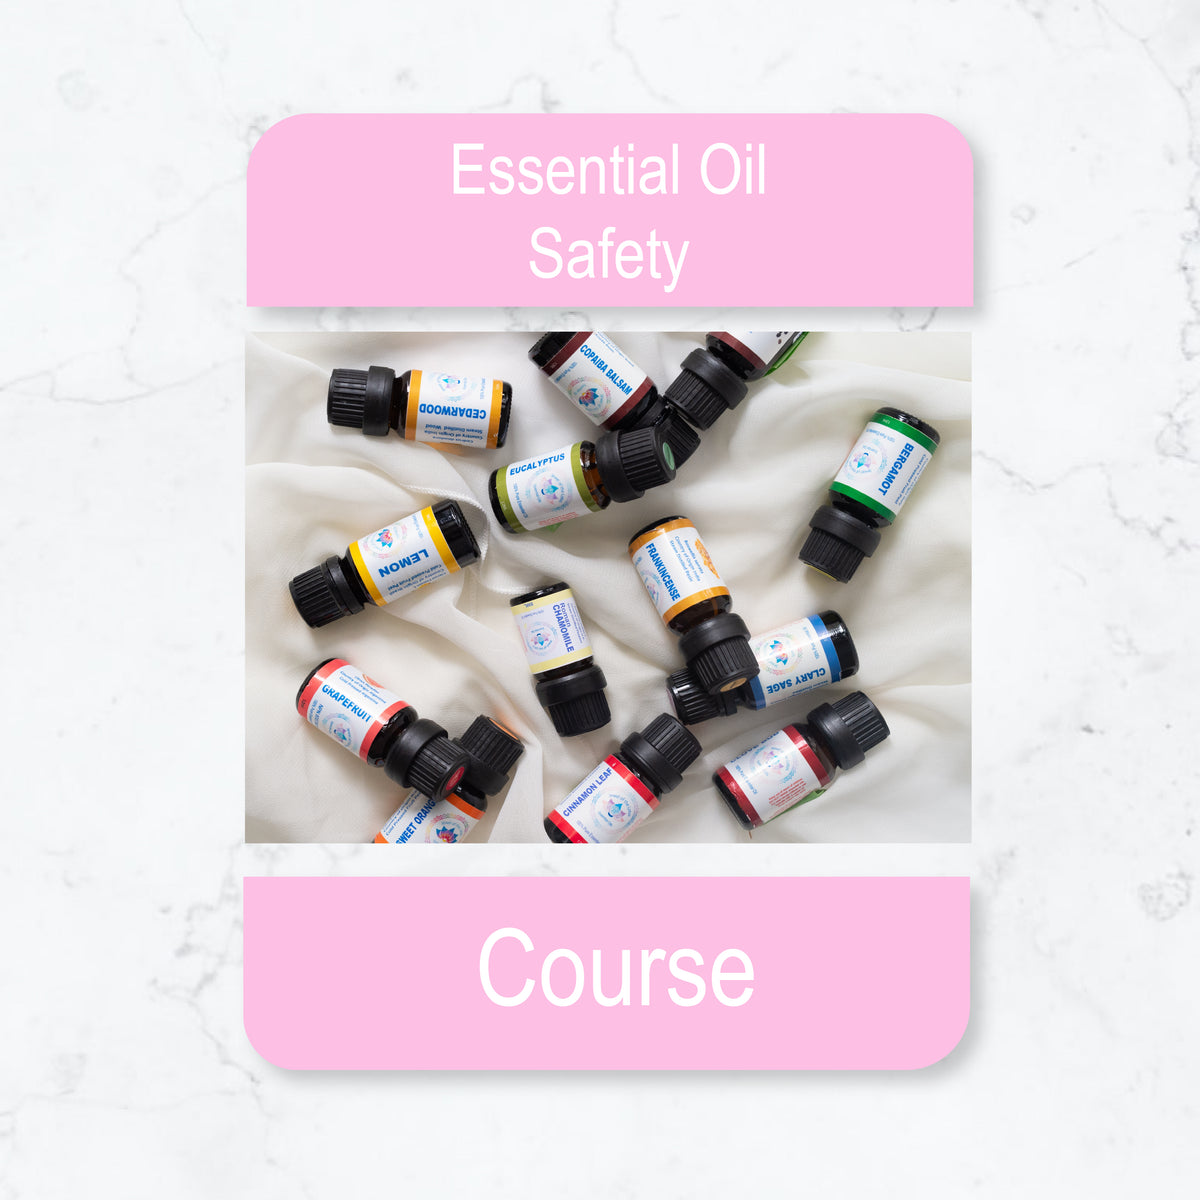 Essential Oil Safety Course